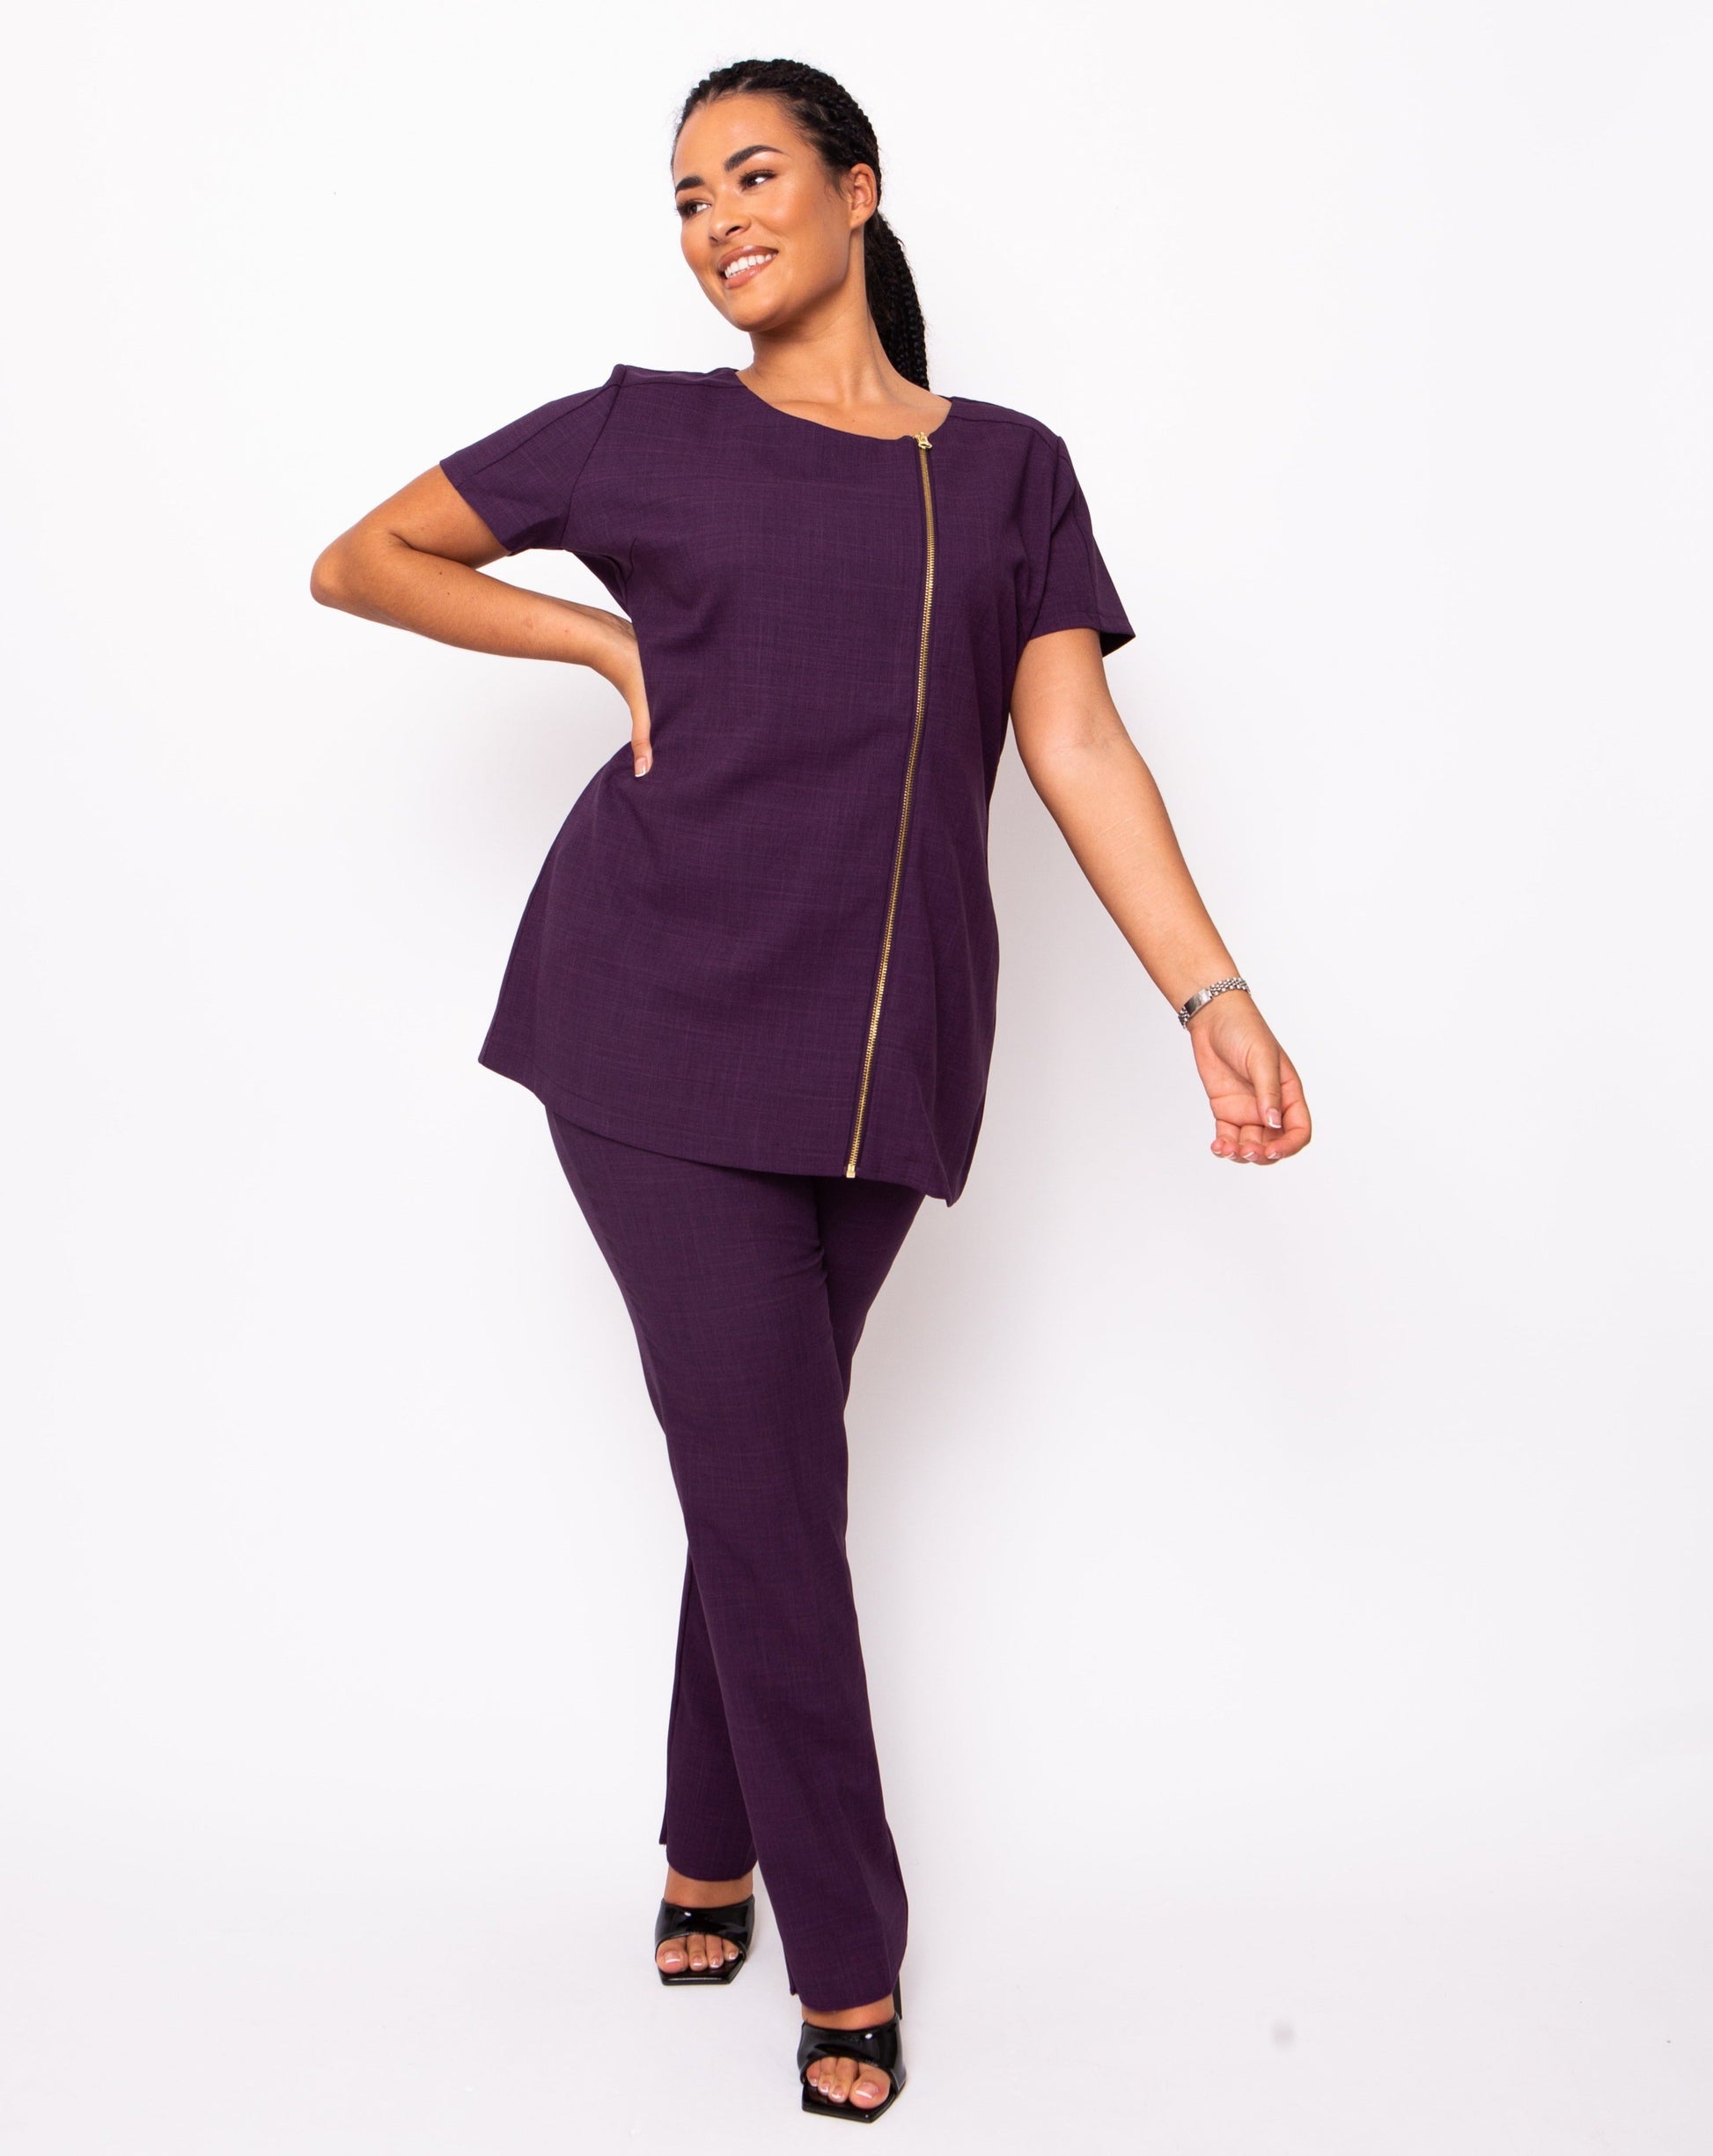 Plum Beauty Tunic and Trousers plus size